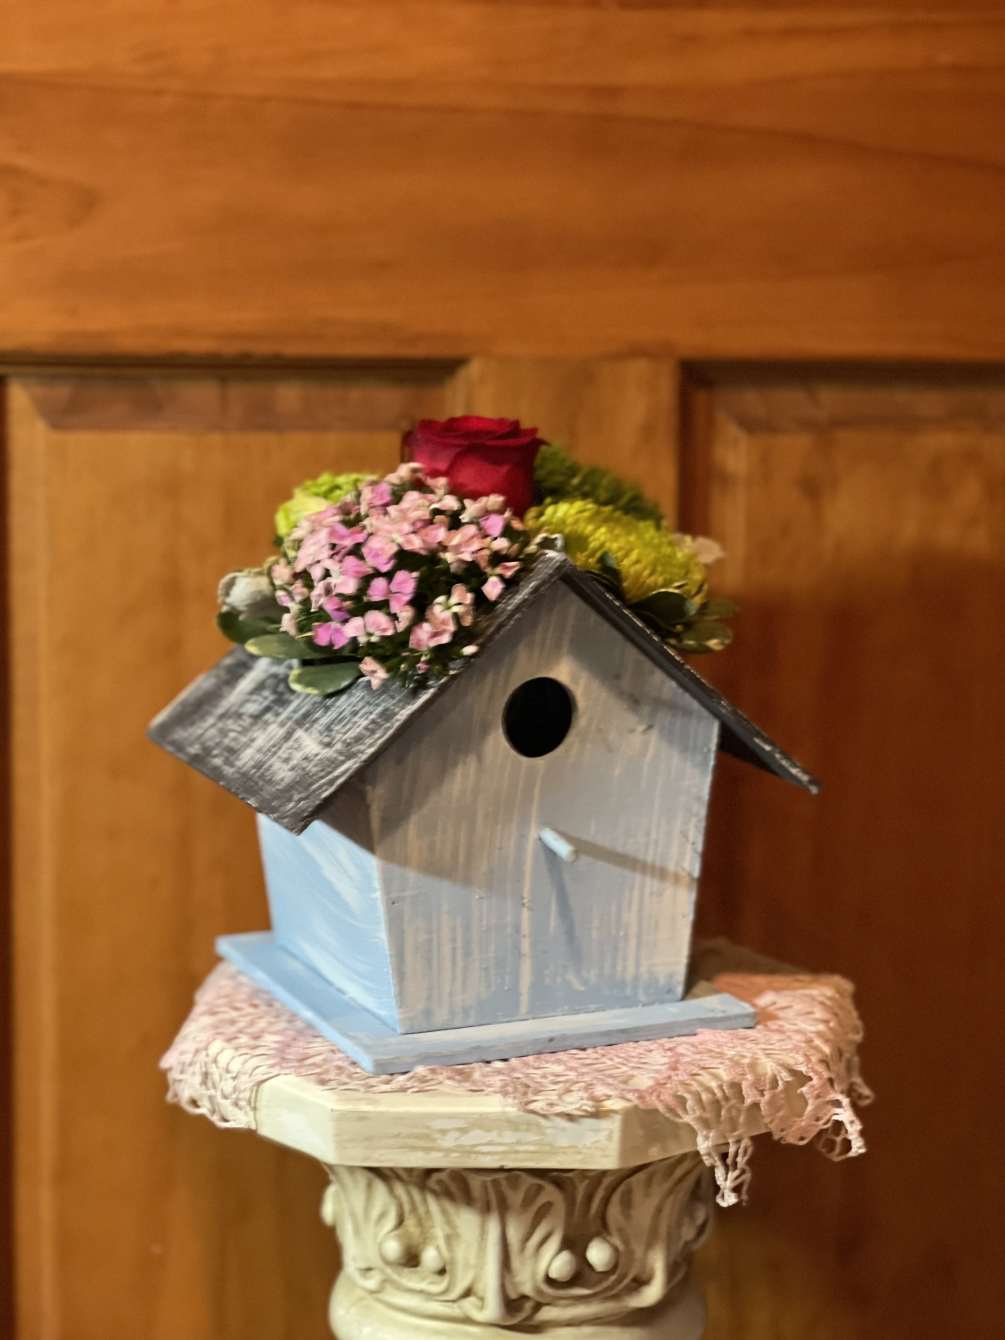 For all our feathers friends. A cute birdhouse design. Sky blue, whitewashed